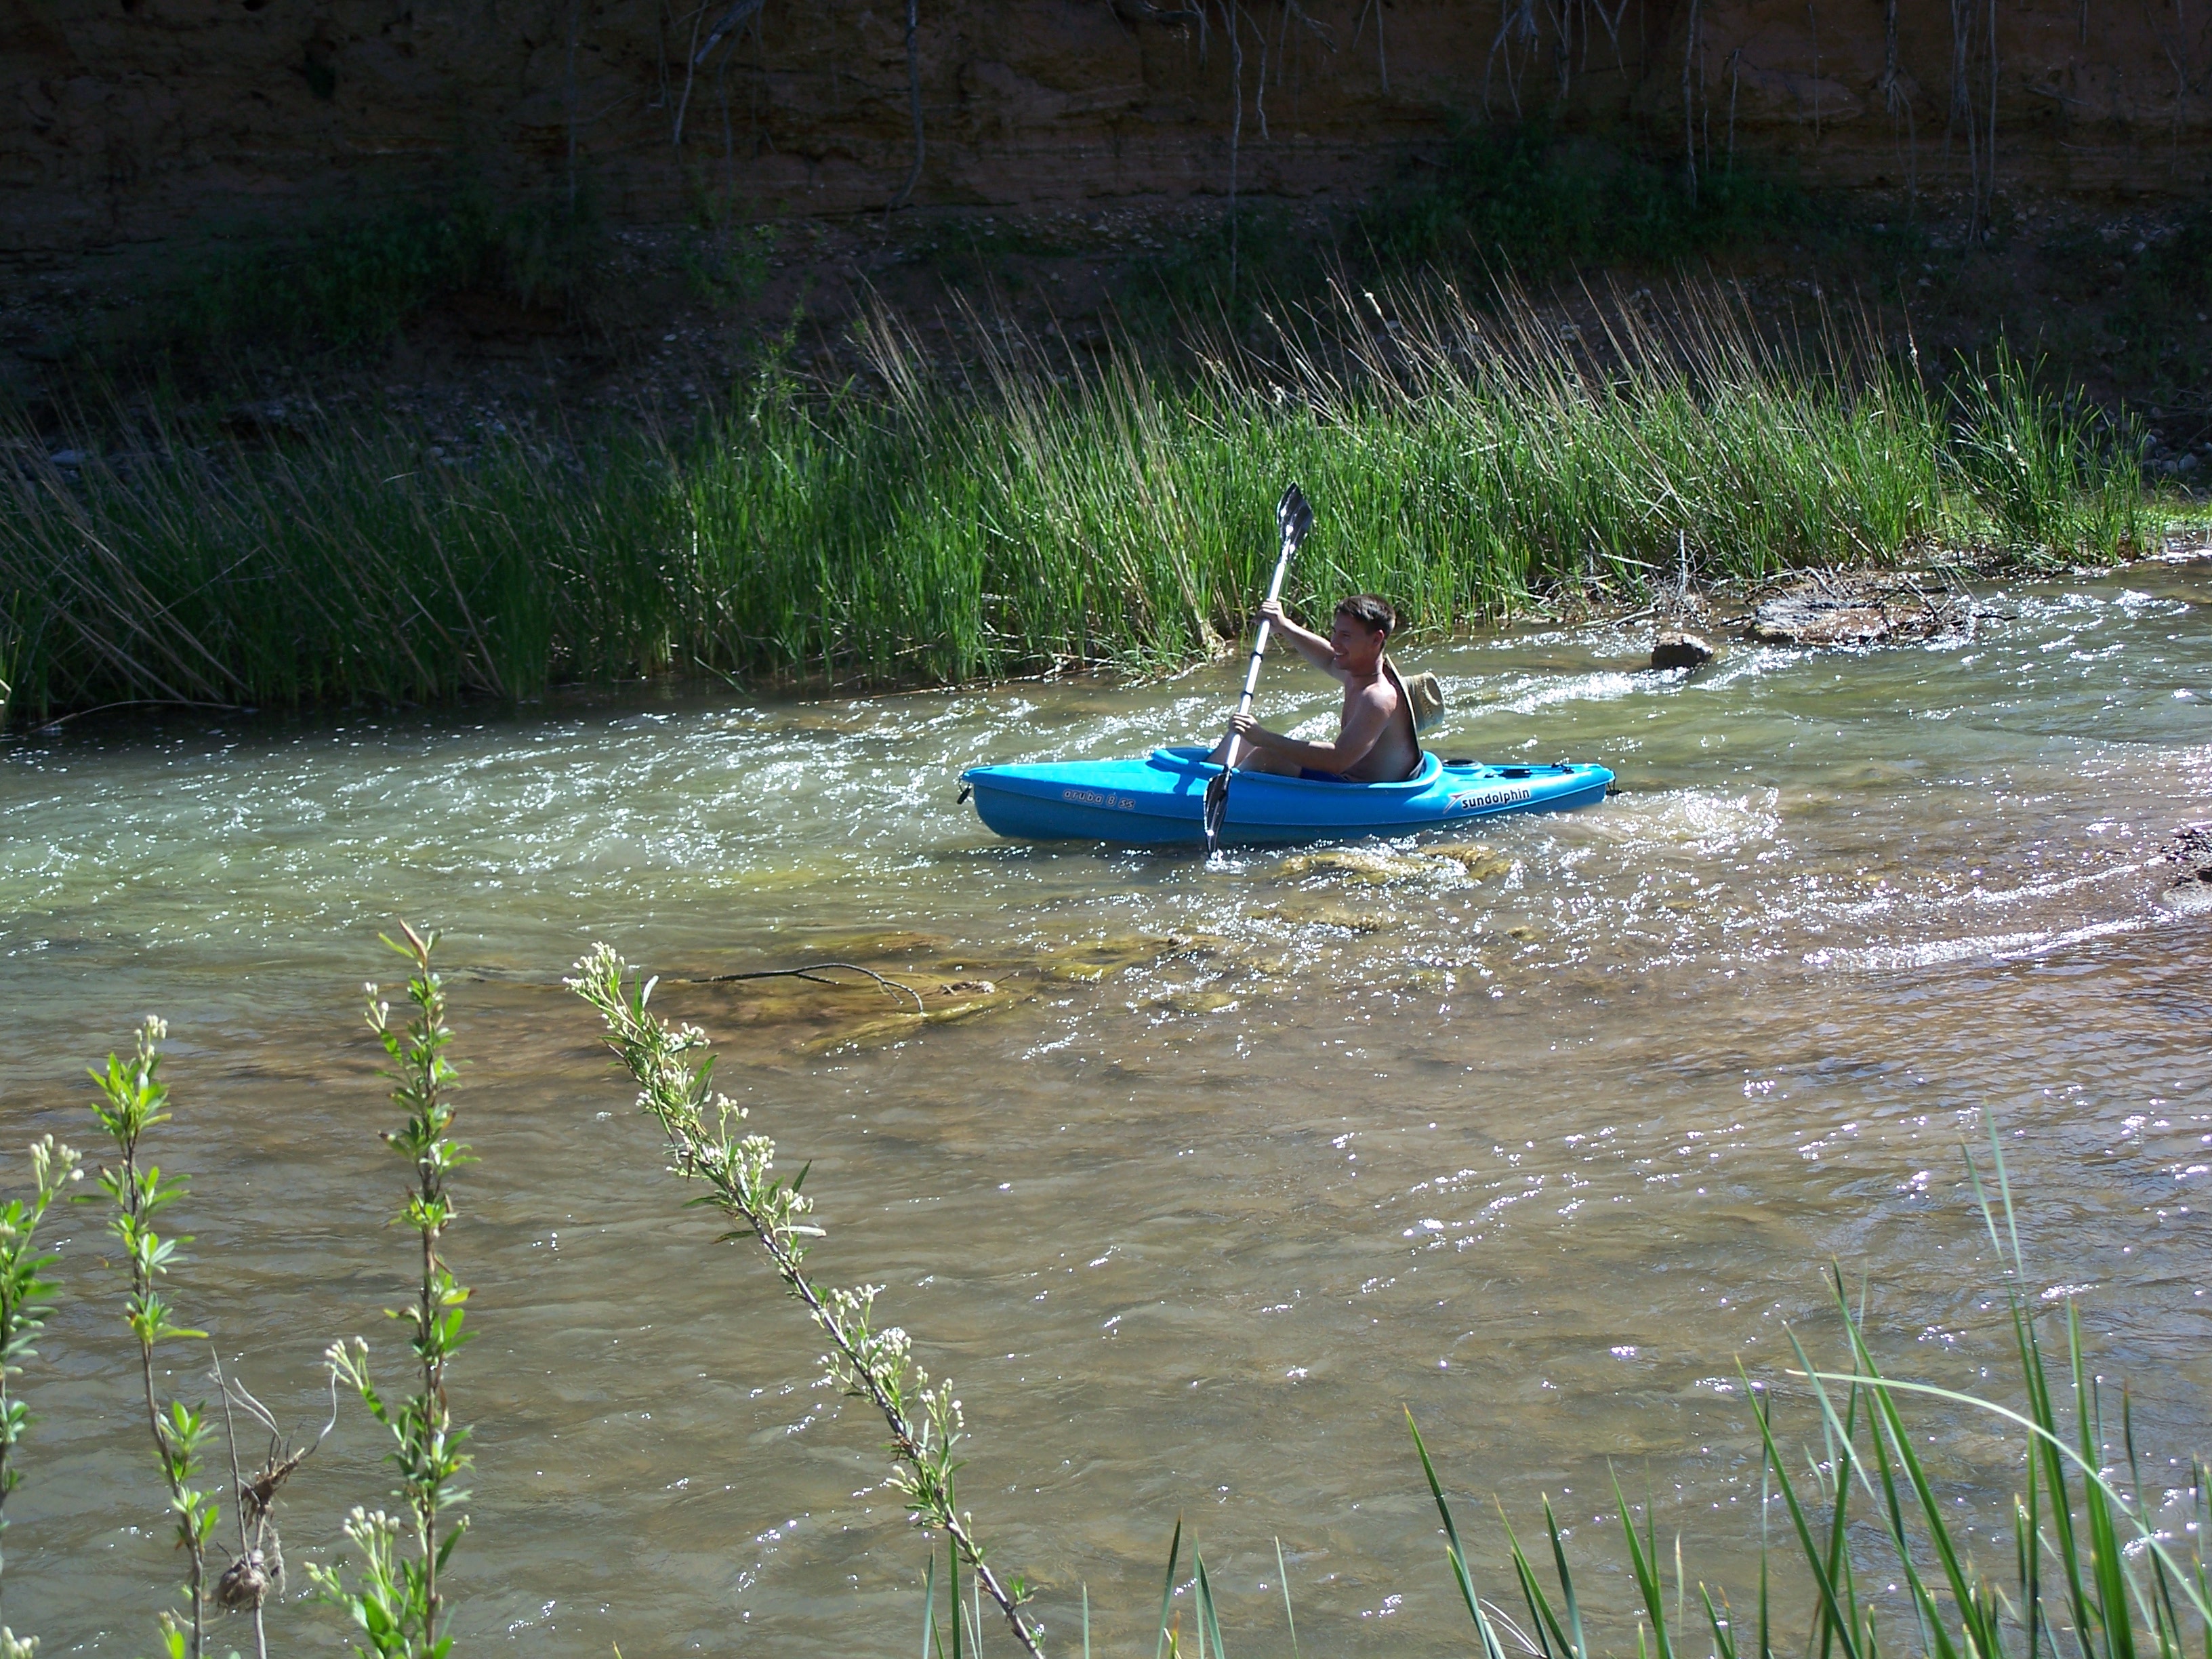 A kayaker navigates fast-moving waters fringed by reeds.